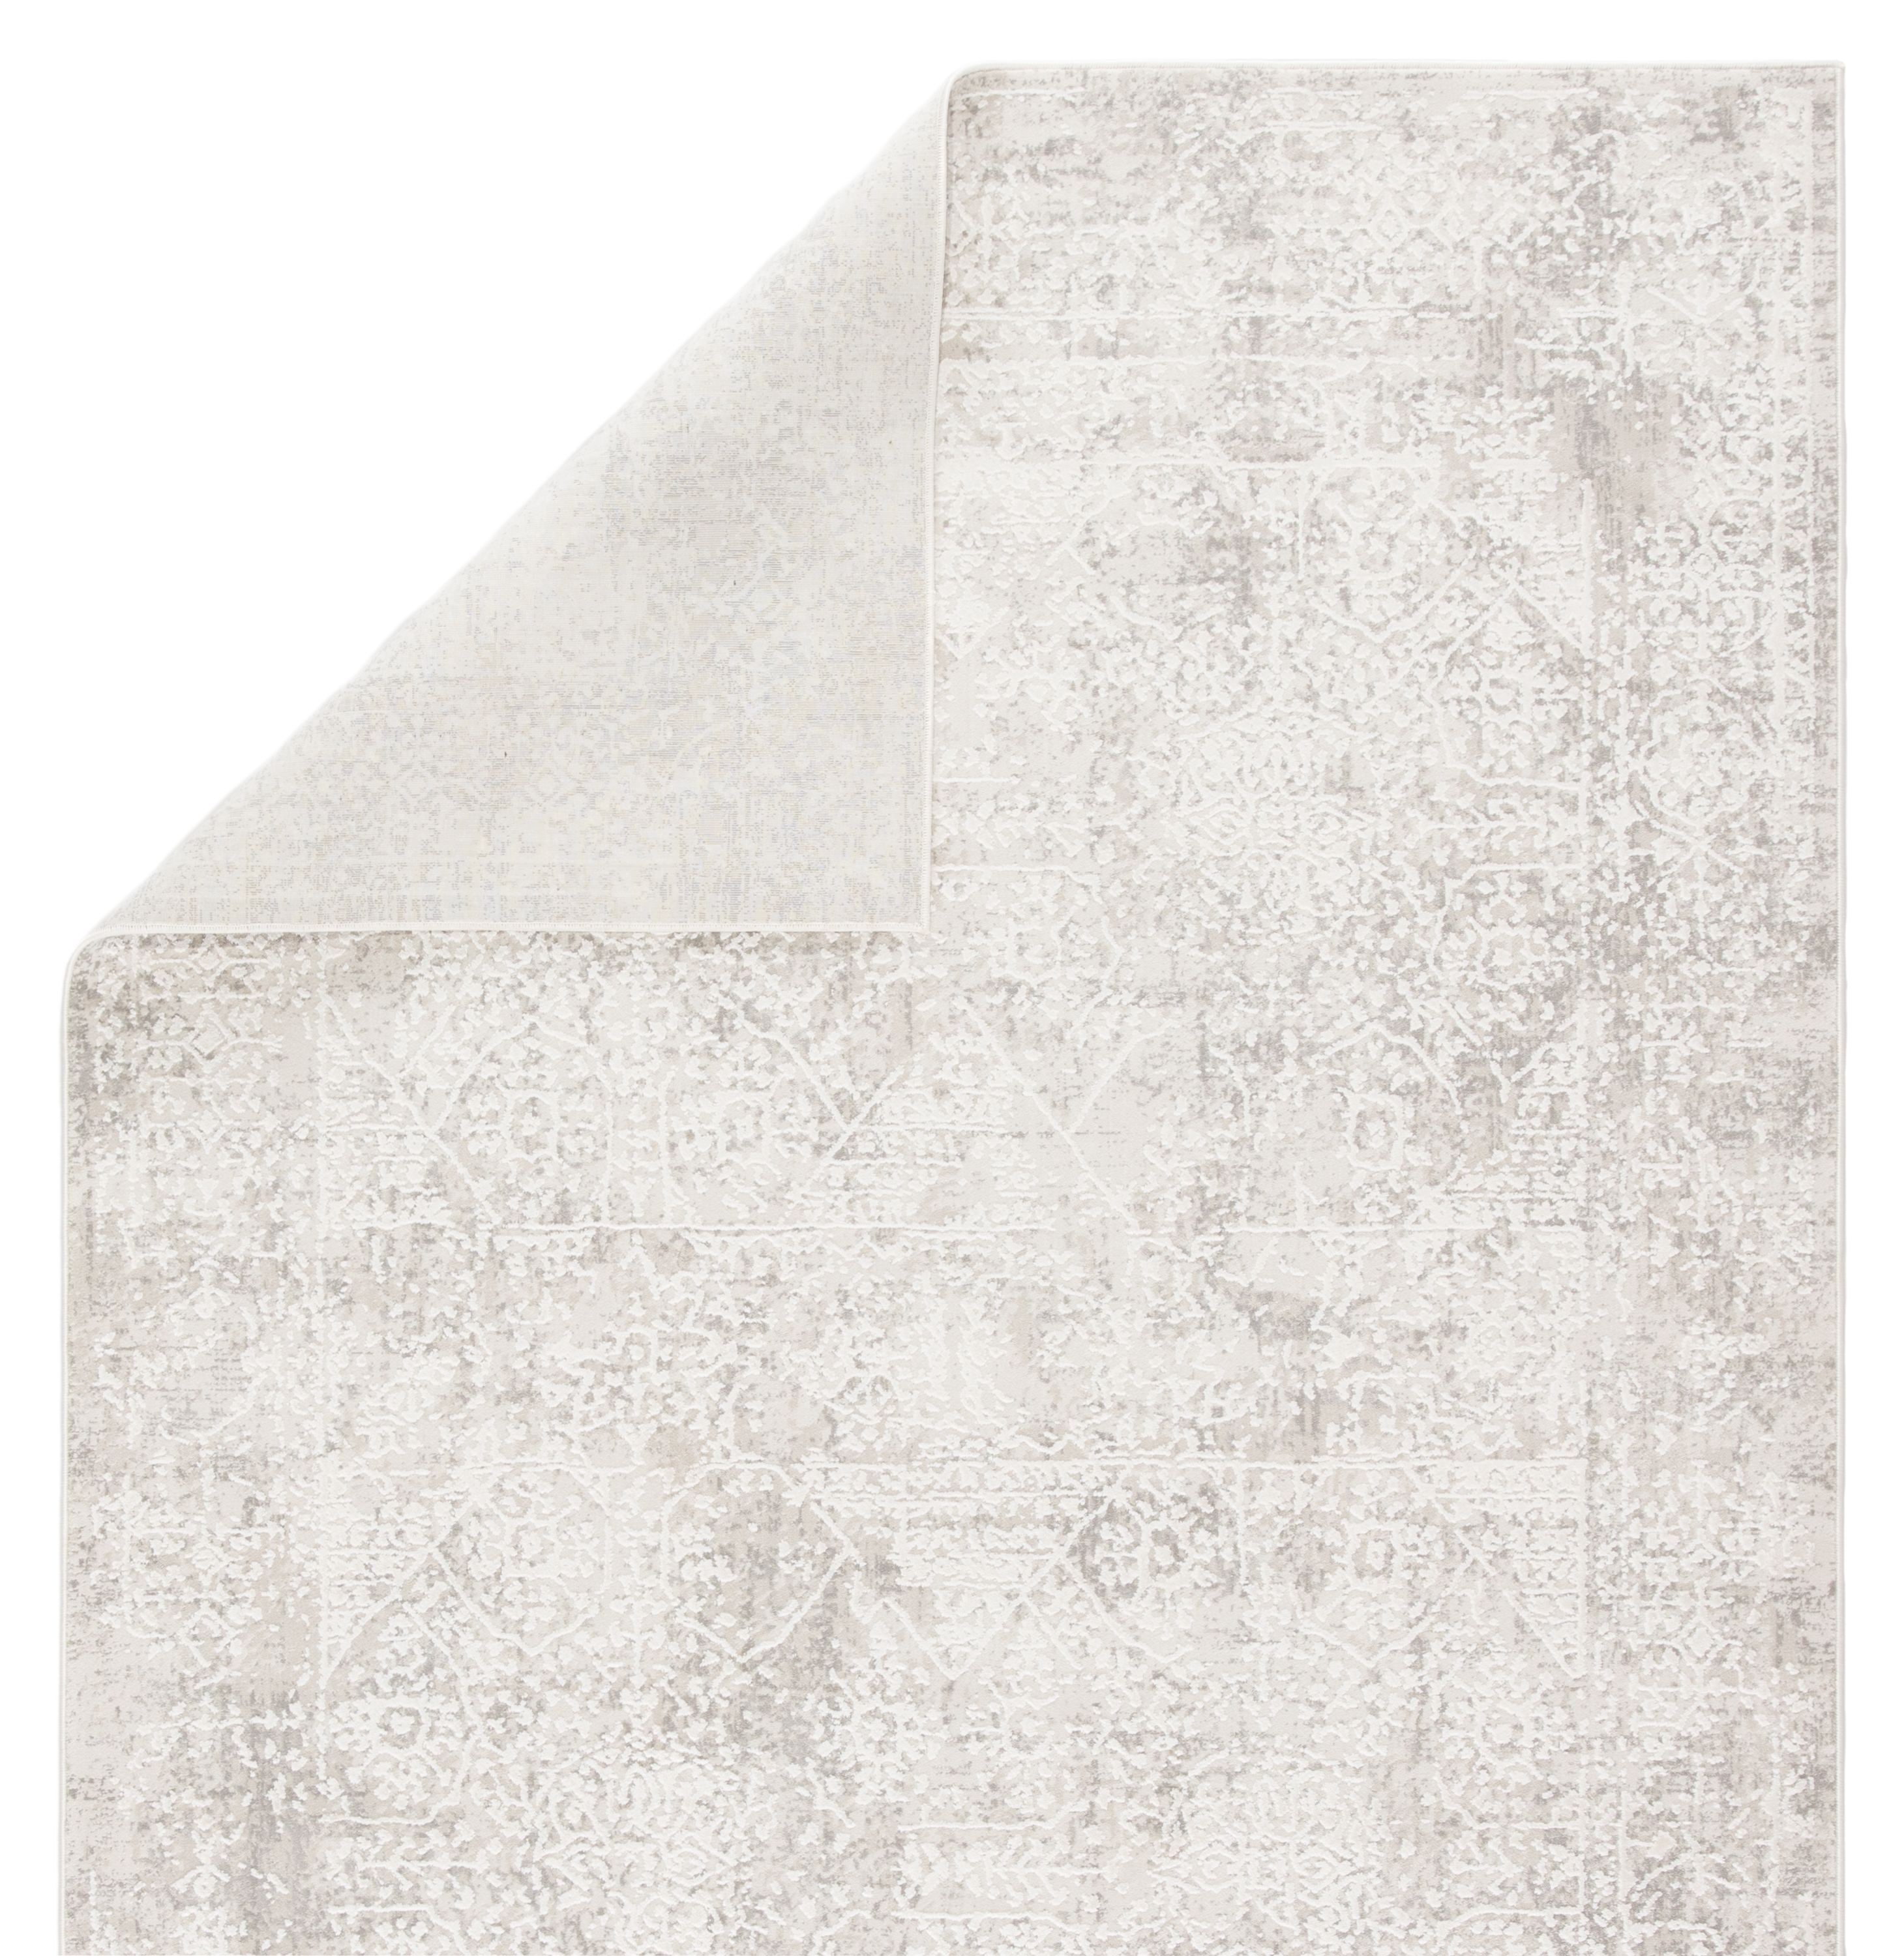 Lianna Abstract Silver/ White Area Rug (5' X 7'6") - Image 2